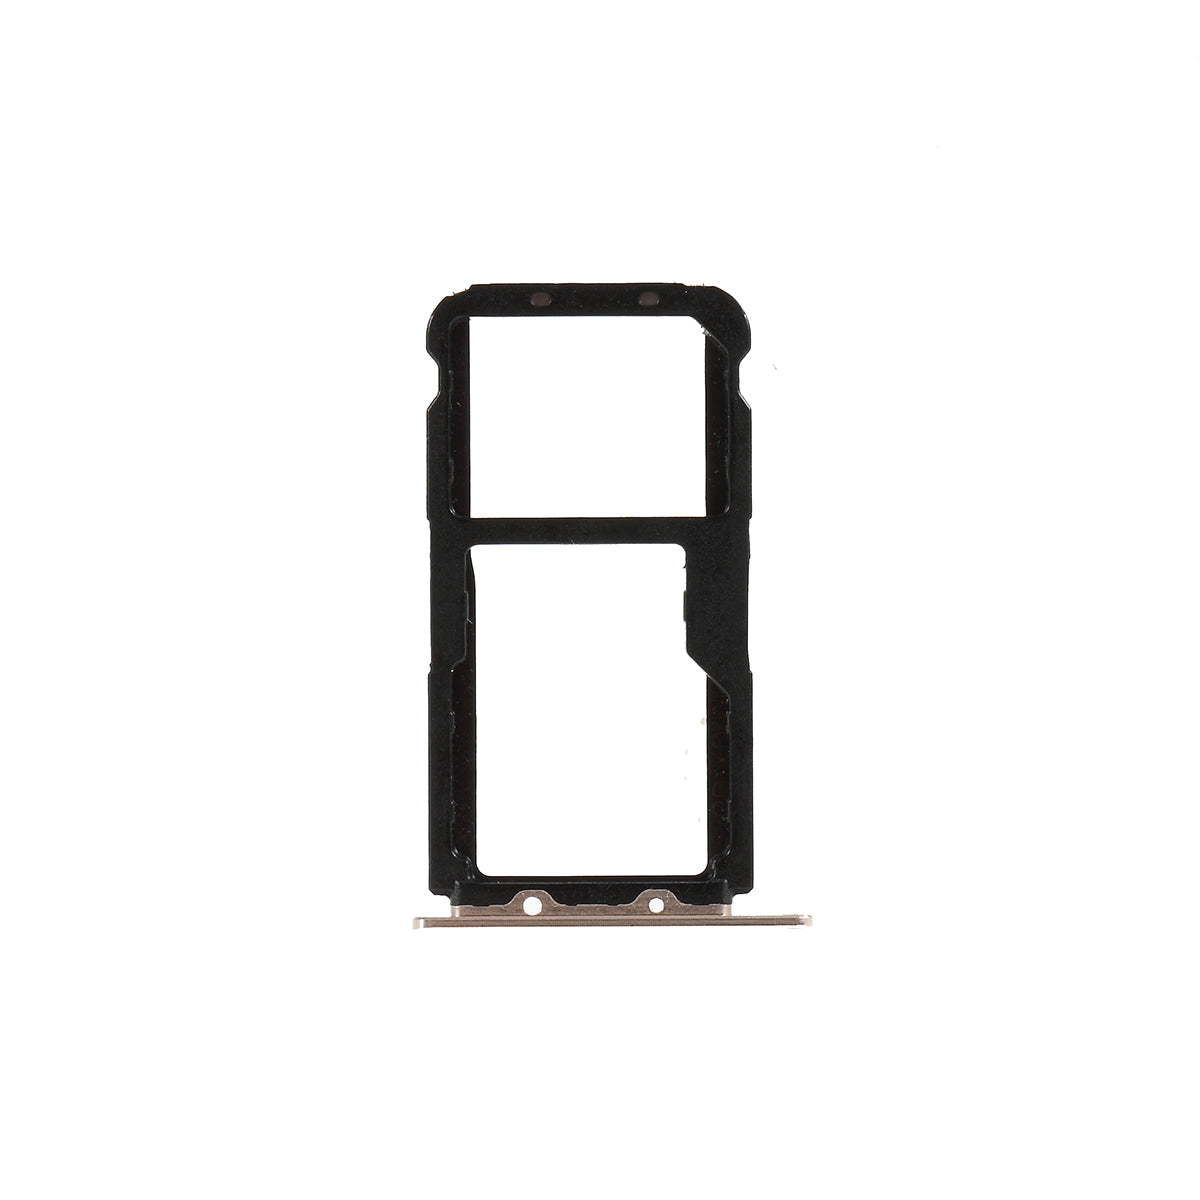 OEM Dual SIM Micro SD Card Tray Holder Replacement for Huawei Mate 20 Lite - Black - Gold